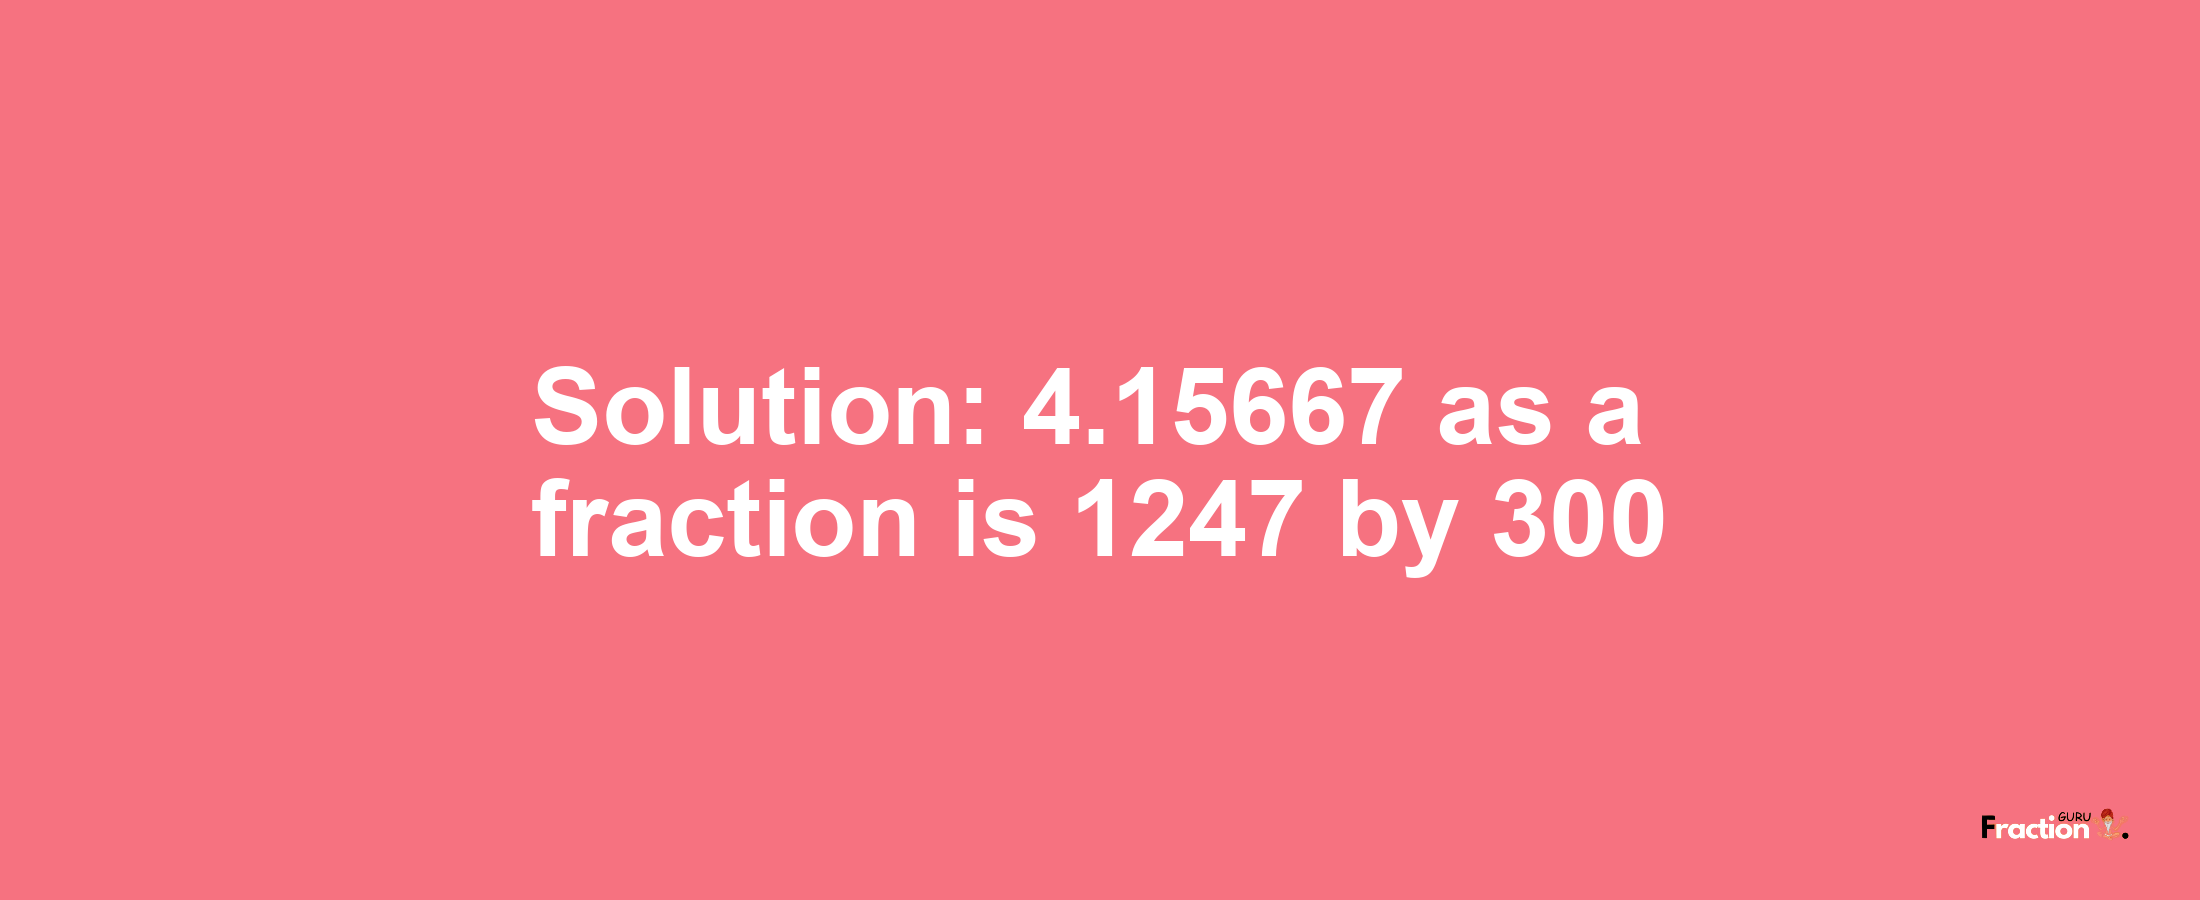 Solution:4.15667 as a fraction is 1247/300